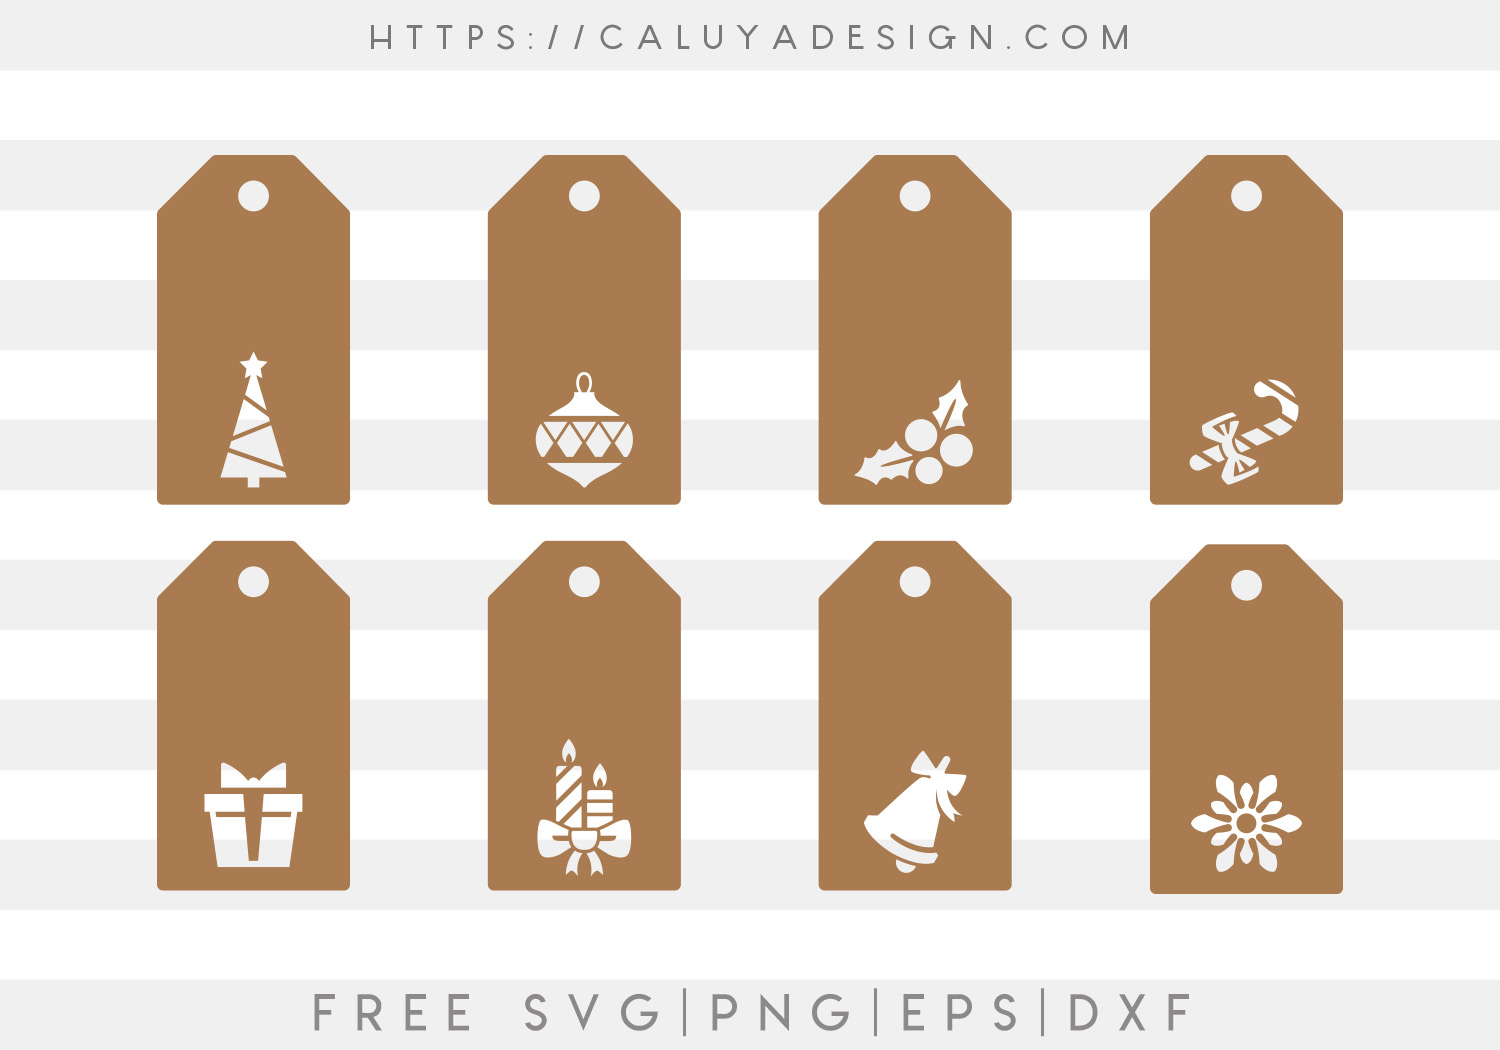 Download Free Mermaid Unicorn Svg Png Eps Dxf By Caluya Design